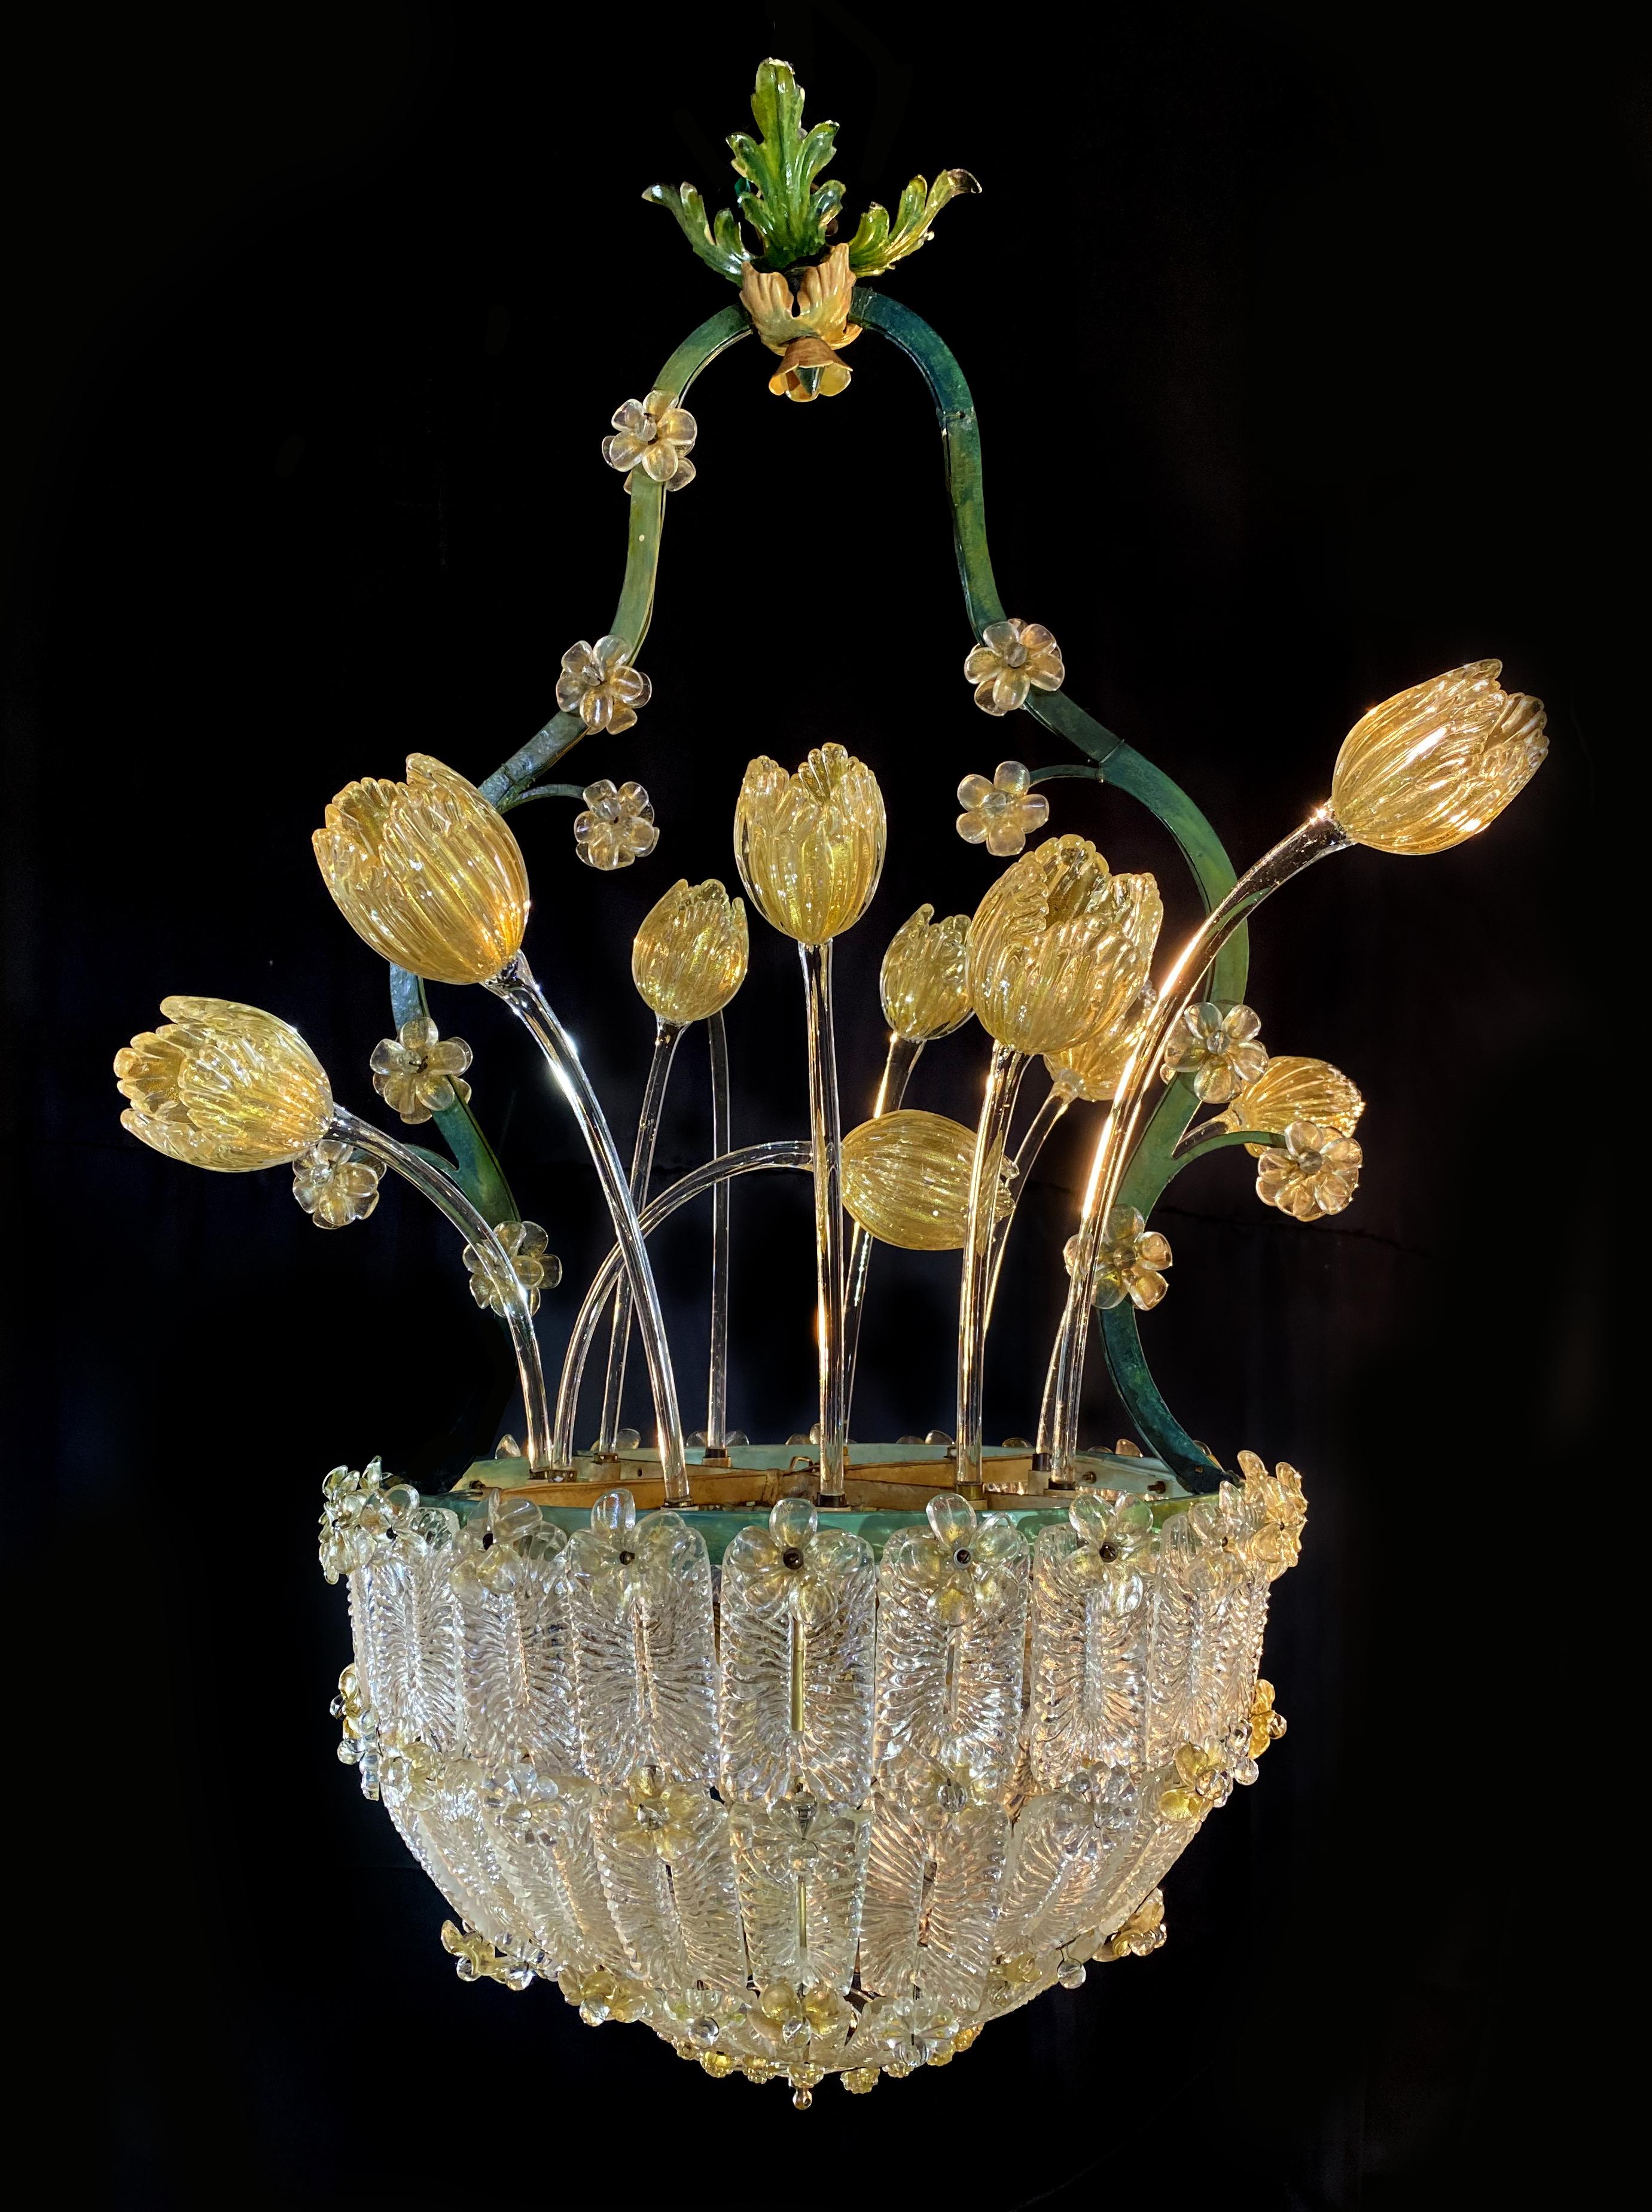 Amazing Glass Flower Chandelier with Gold Inclusions, Murano, 1950s For Sale 4